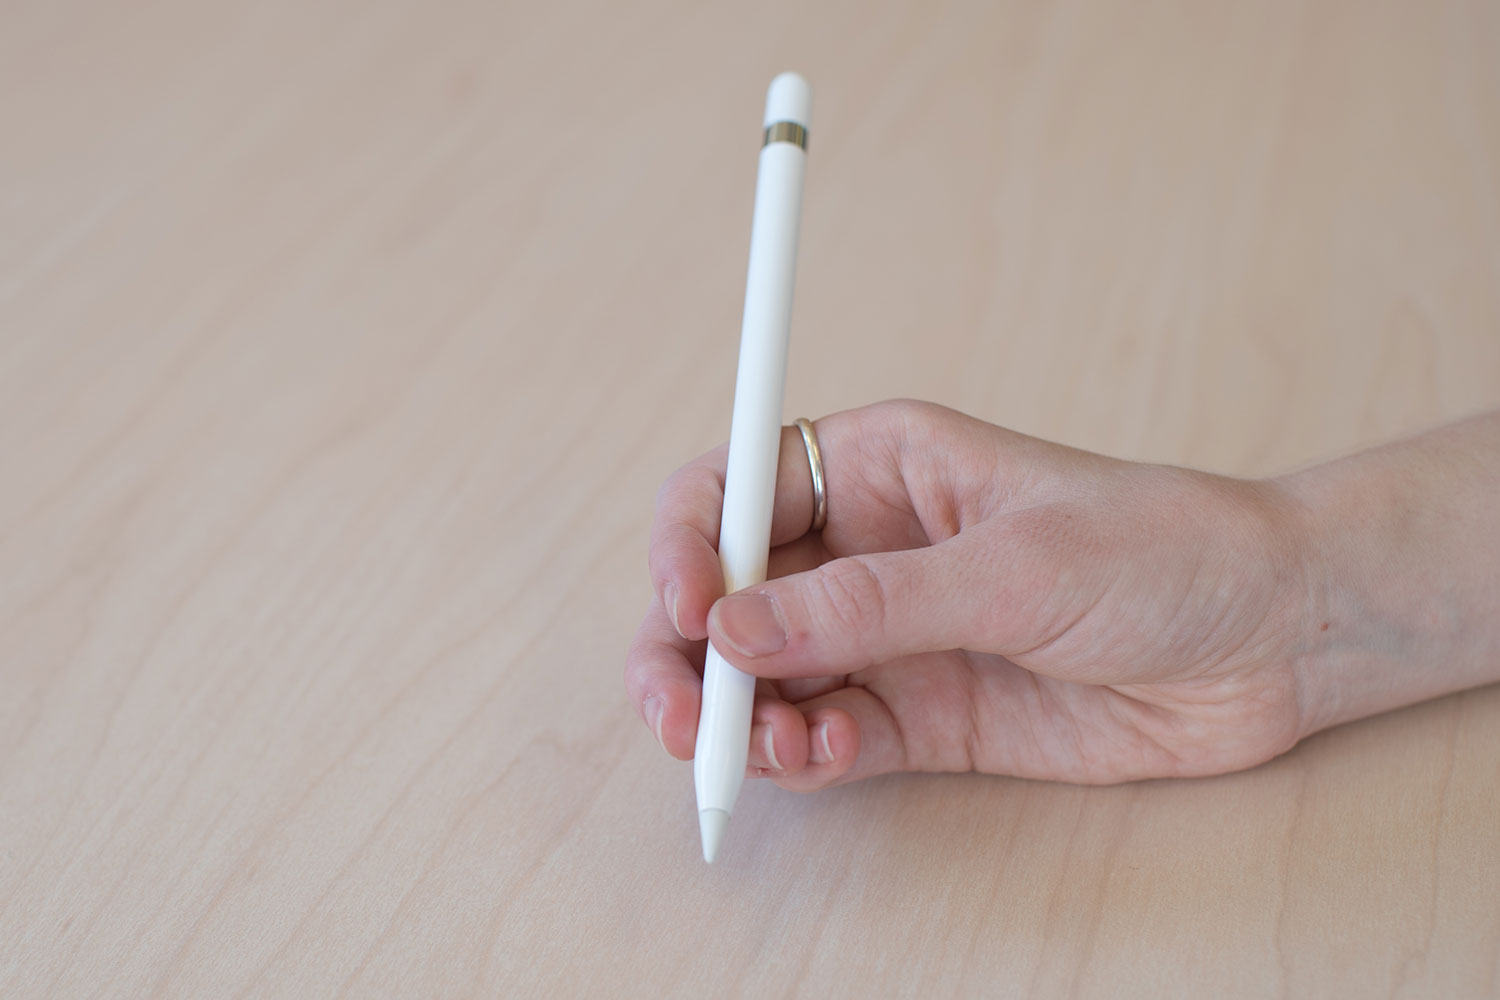 Best Apple Pencil Deals: Save on Apple's Styluses and Third-Party